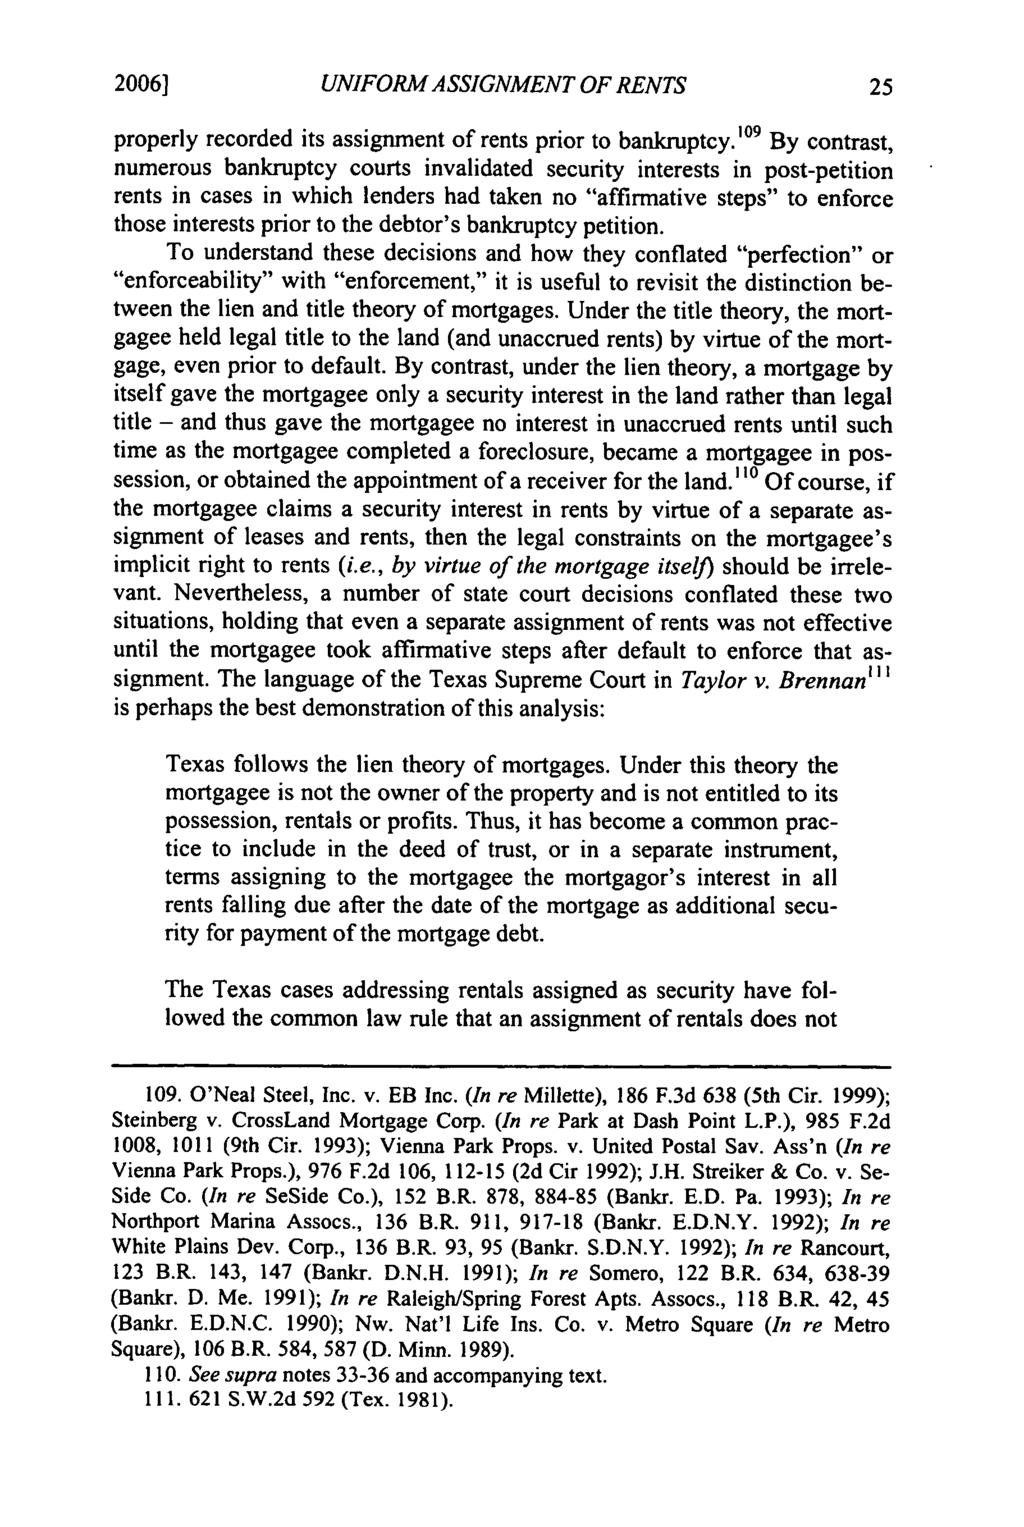 2006] Freyermuth: Freyermuth: Modernizing Security in Rents UNIFORM ASSIGNMENT OF RENTS properly recorded its assignment of rents prior to bankruptcy.